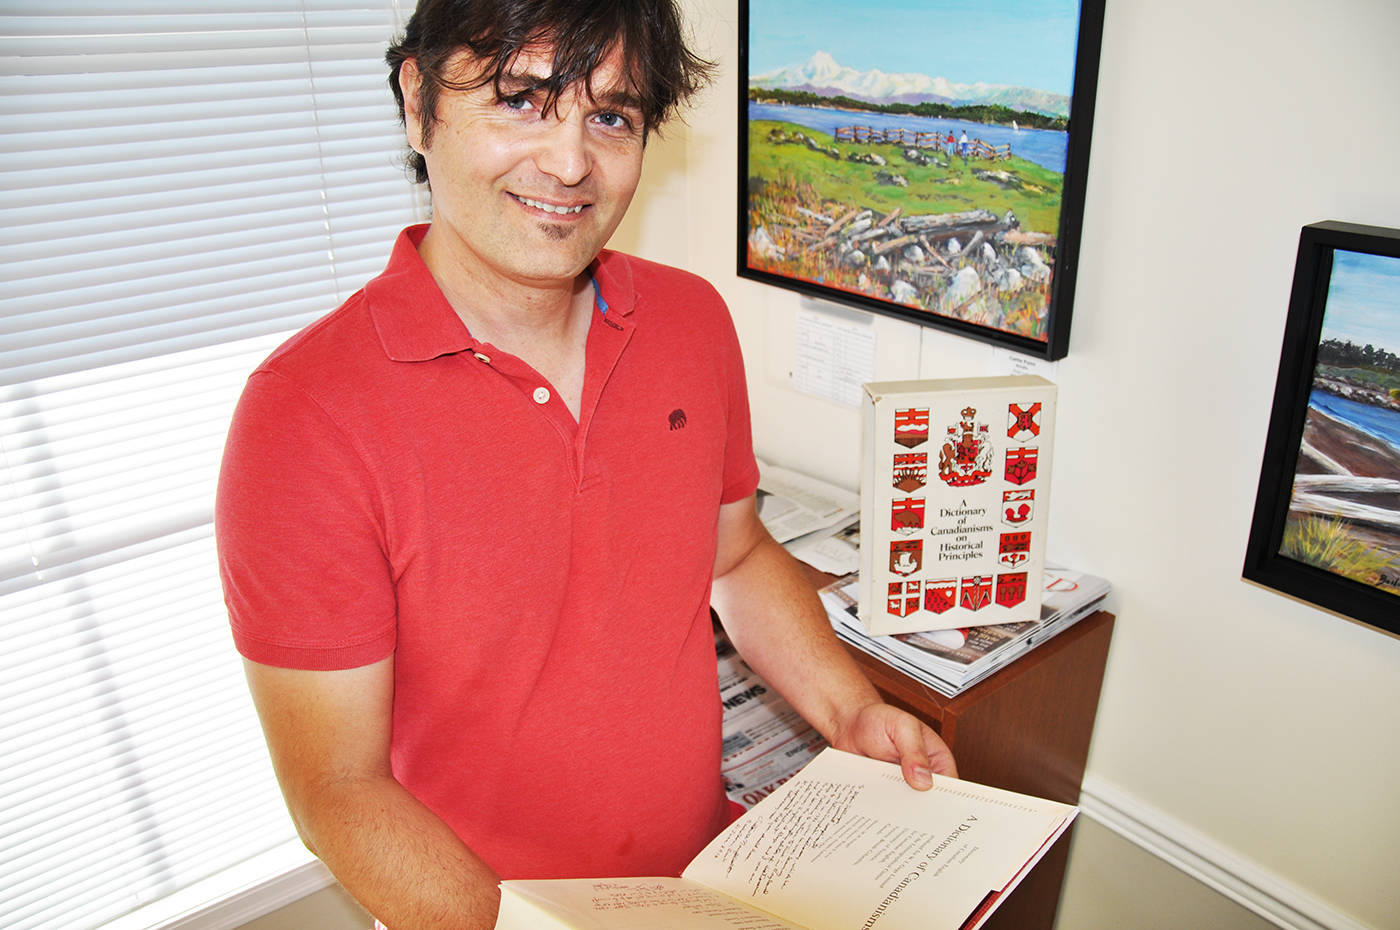 Stefan Dollinger, editor in chief of the Second Edition of the Dictionary of Canadianisms on Historical Principles. (Octavian Lacatusu/Oak Bay News)